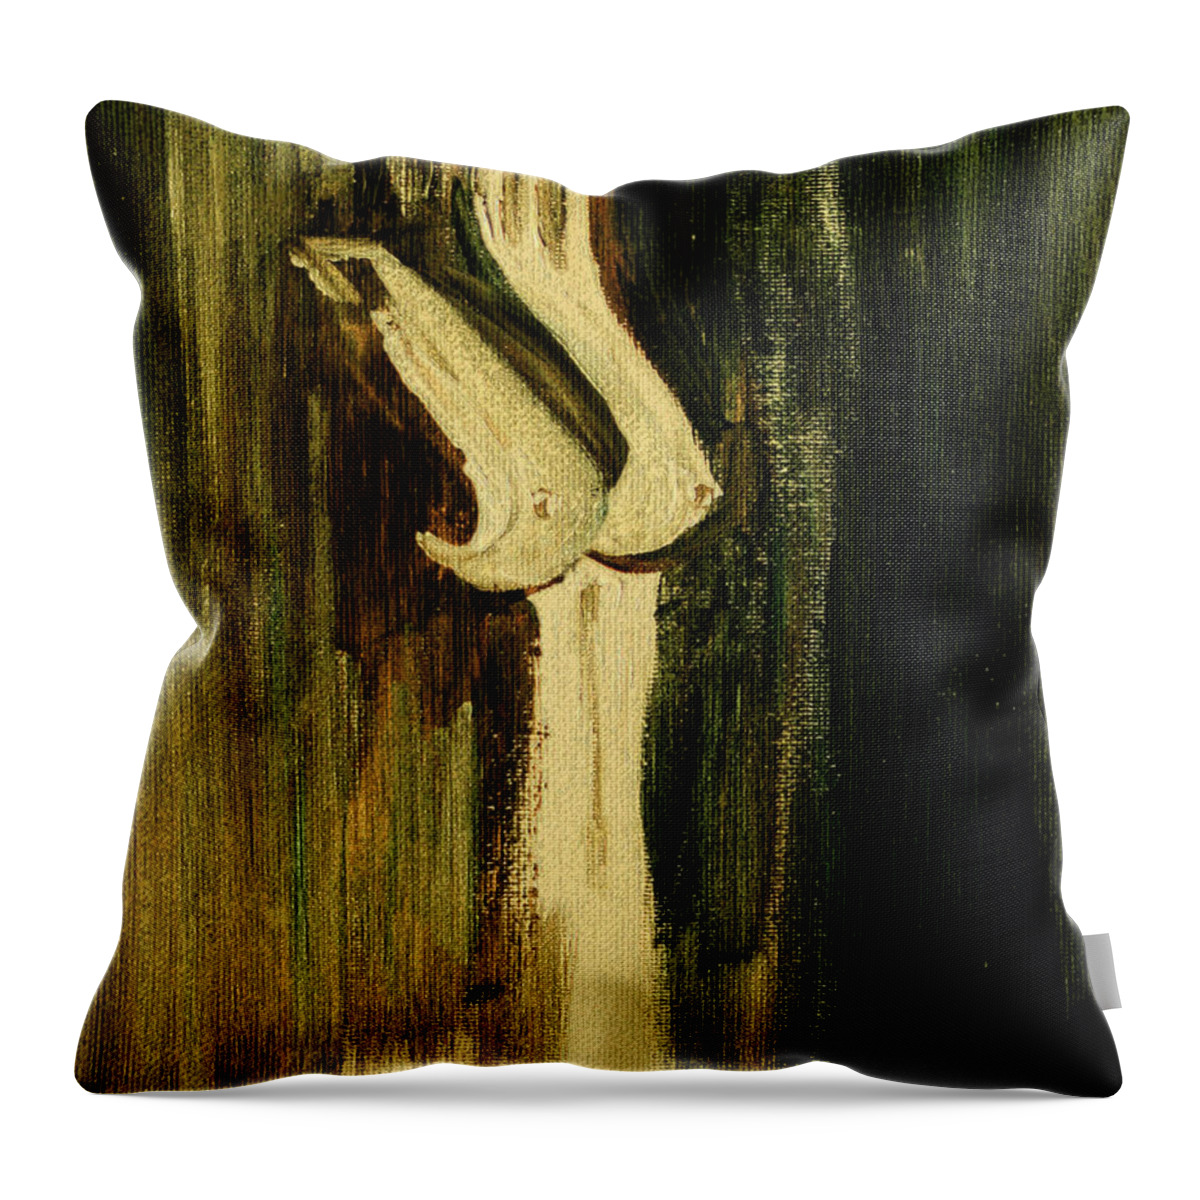 Naked Beauty Throw Pillow featuring the painting Naked Beauty by Julie Lueders 